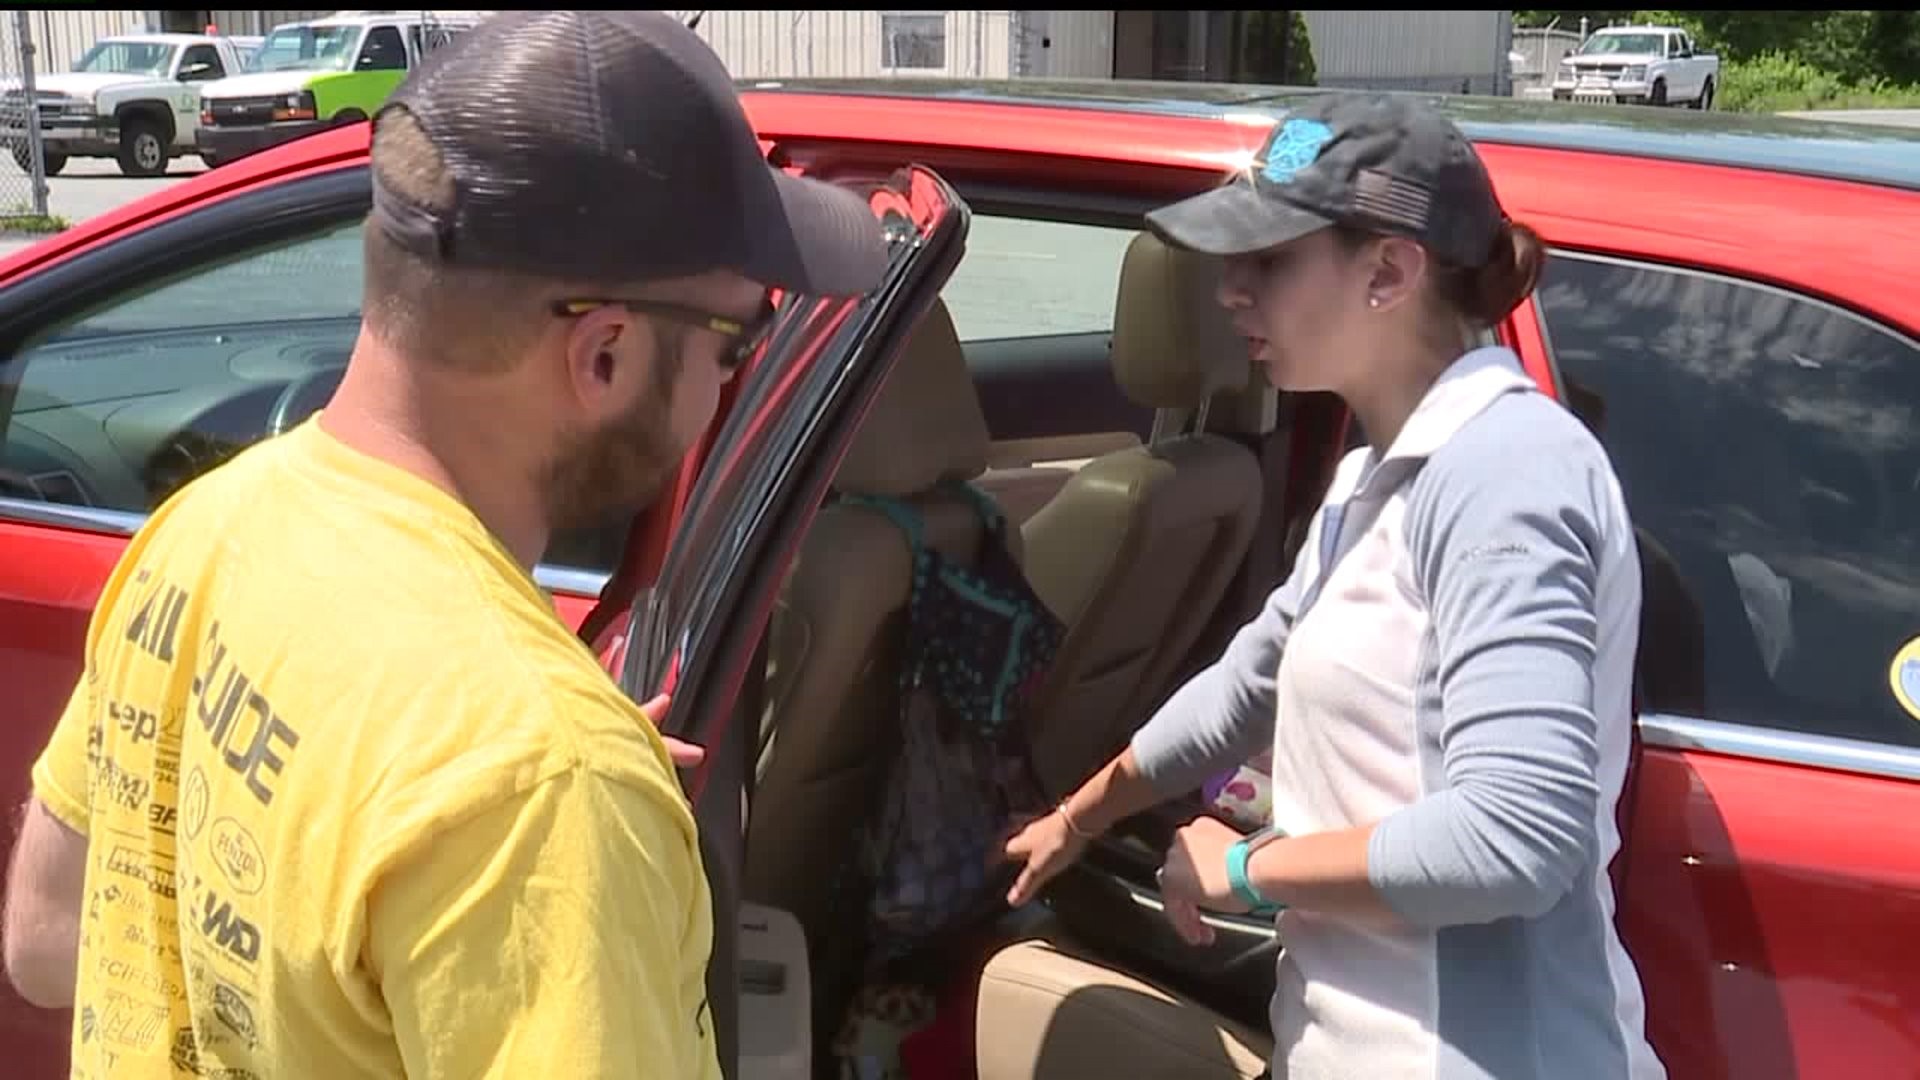 National Child Passenger Safety Week kicks off with free car seat inspections